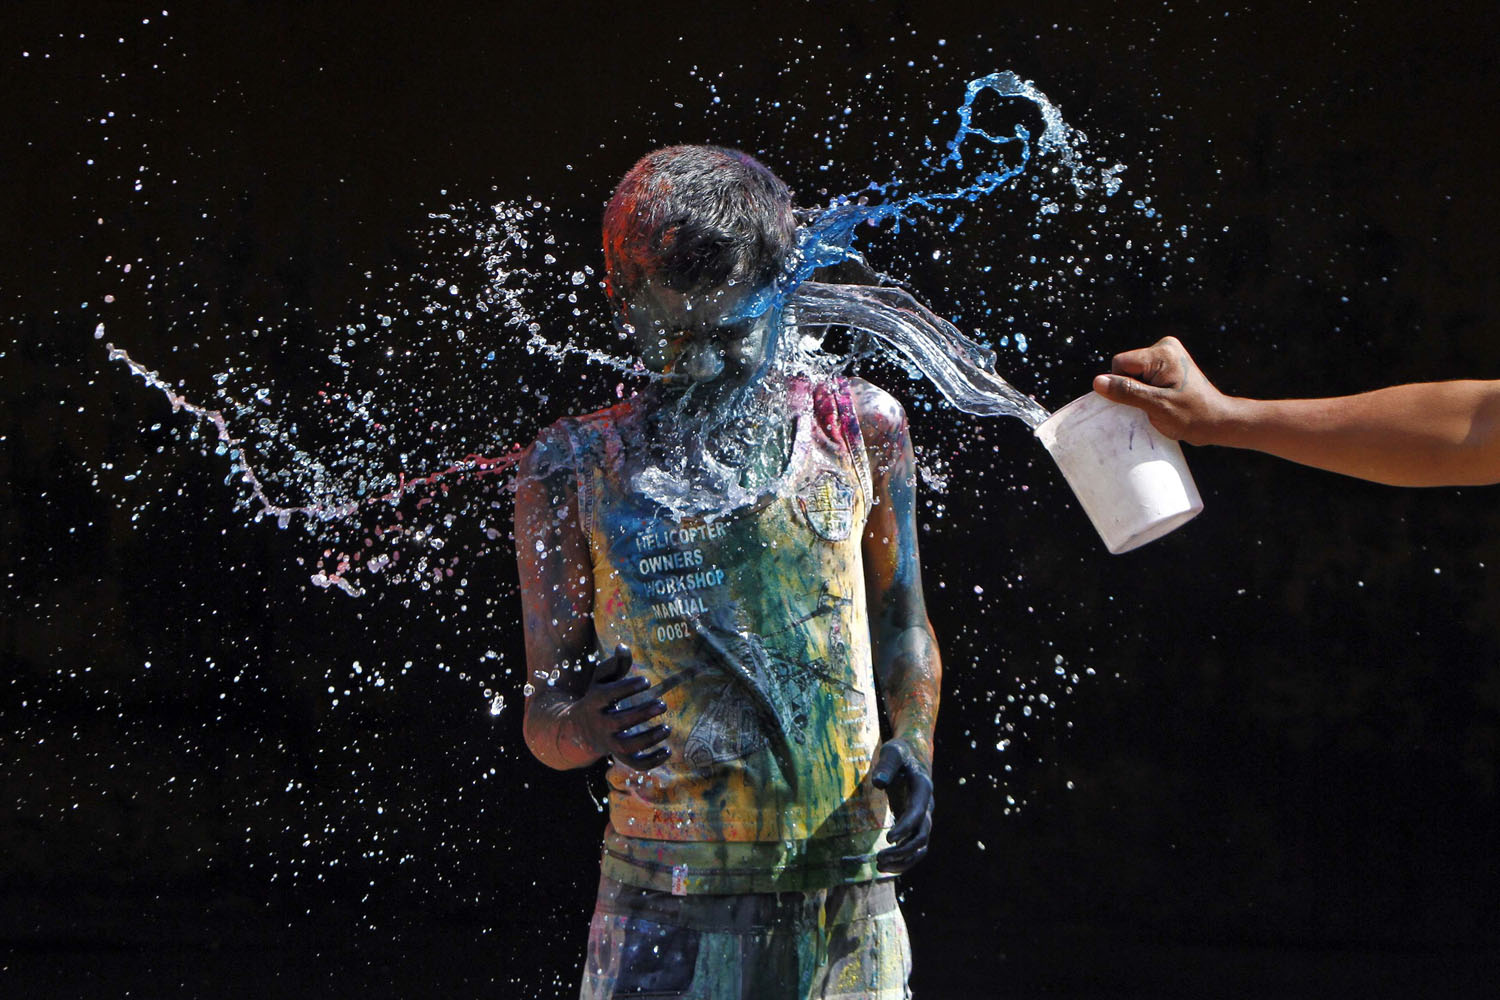 March 27, 2013. A boy smeared with colors reacts as another boy pours water on him during Holi celebrations in the southern Indian city of Chennai.